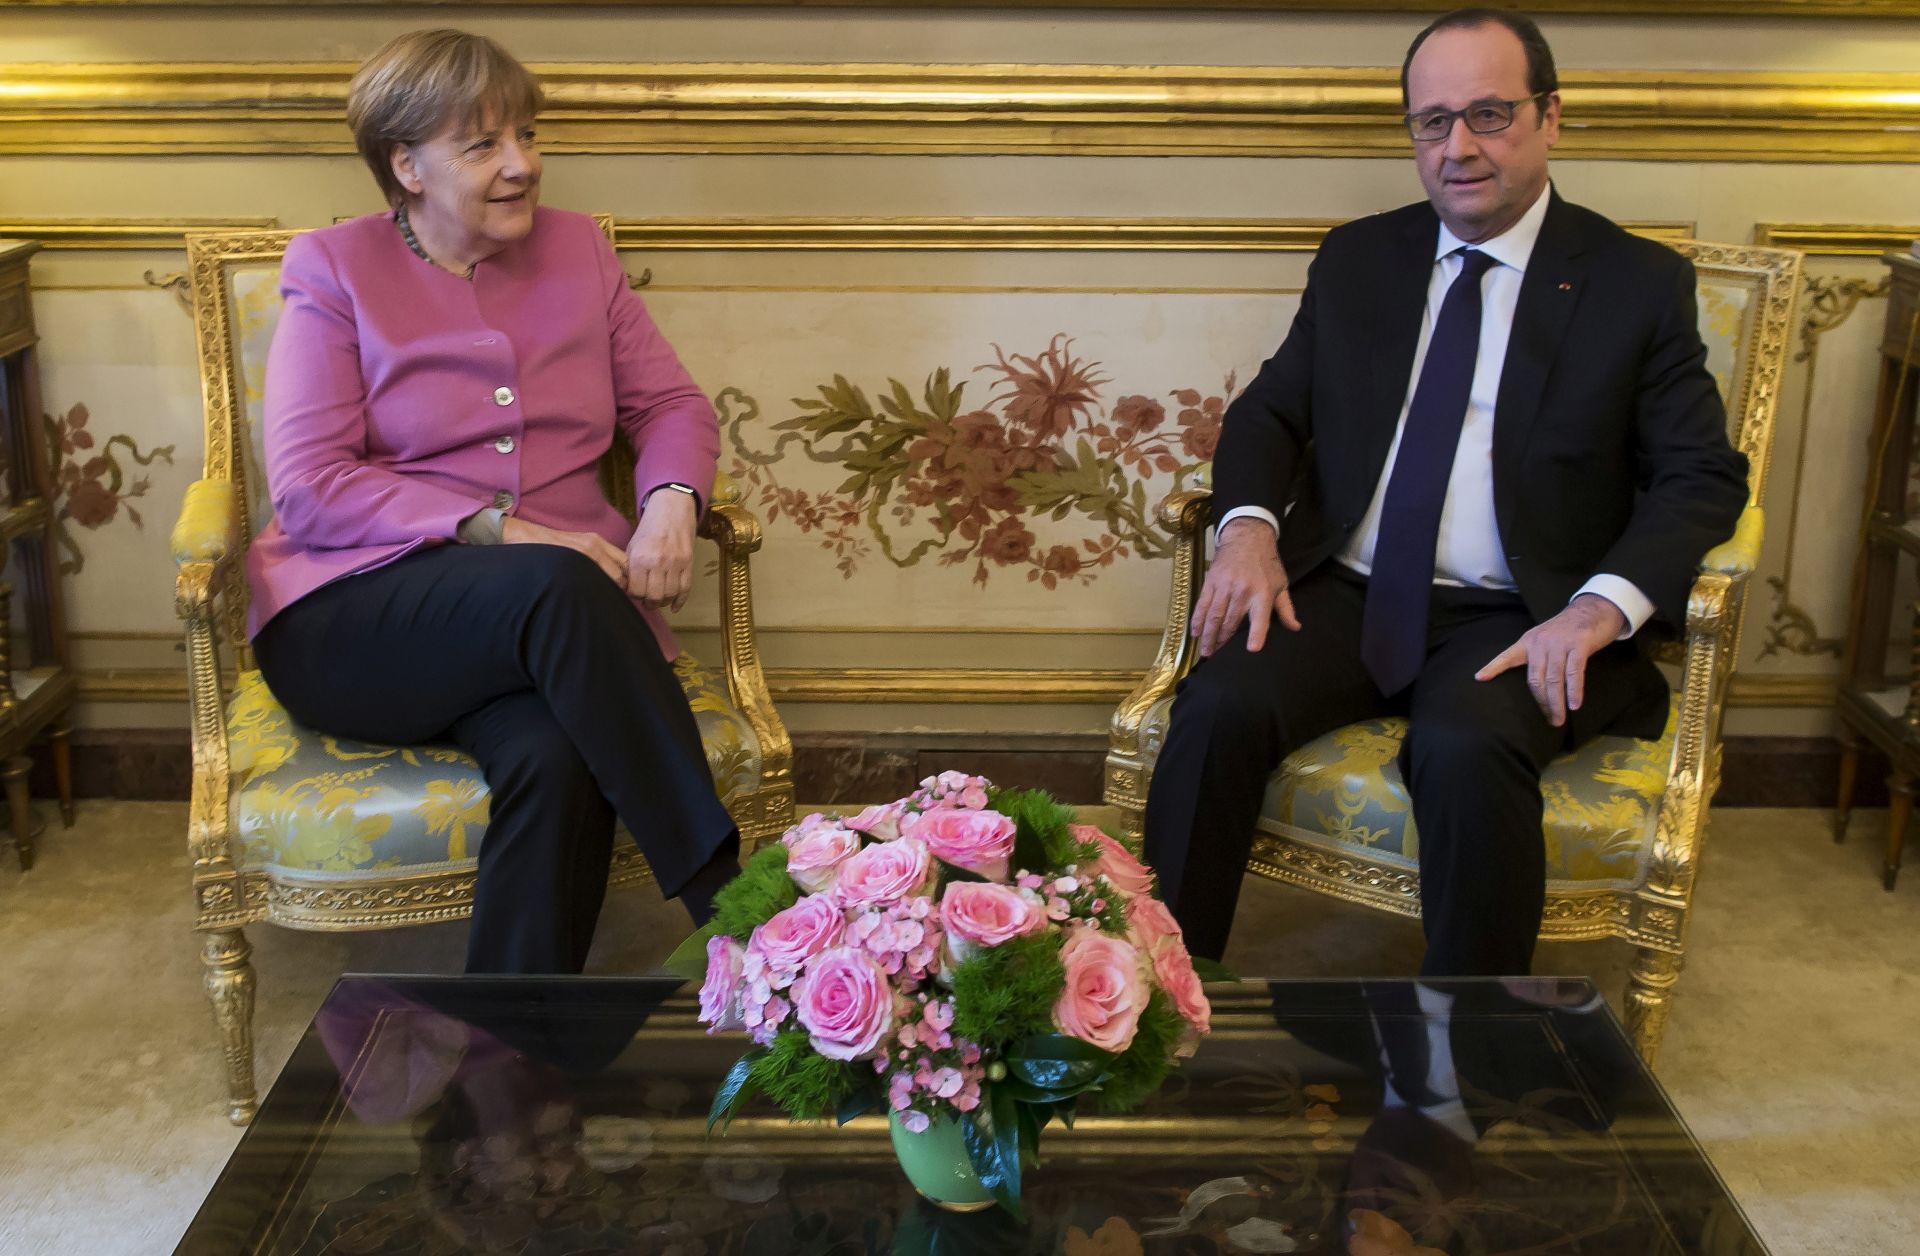 epa05193678 French President Francois Hollande (R) attends a meeting with German Chancellor Angela Merkel (L) at the Elysee Palace in Paris, France, 04 March 2016. The two leaders met to prepare the upcoming EU heads of state meeting to be held in Brussels on 07 March.  EPA/IAN LANGSDON / POOL MAXPPP OUT